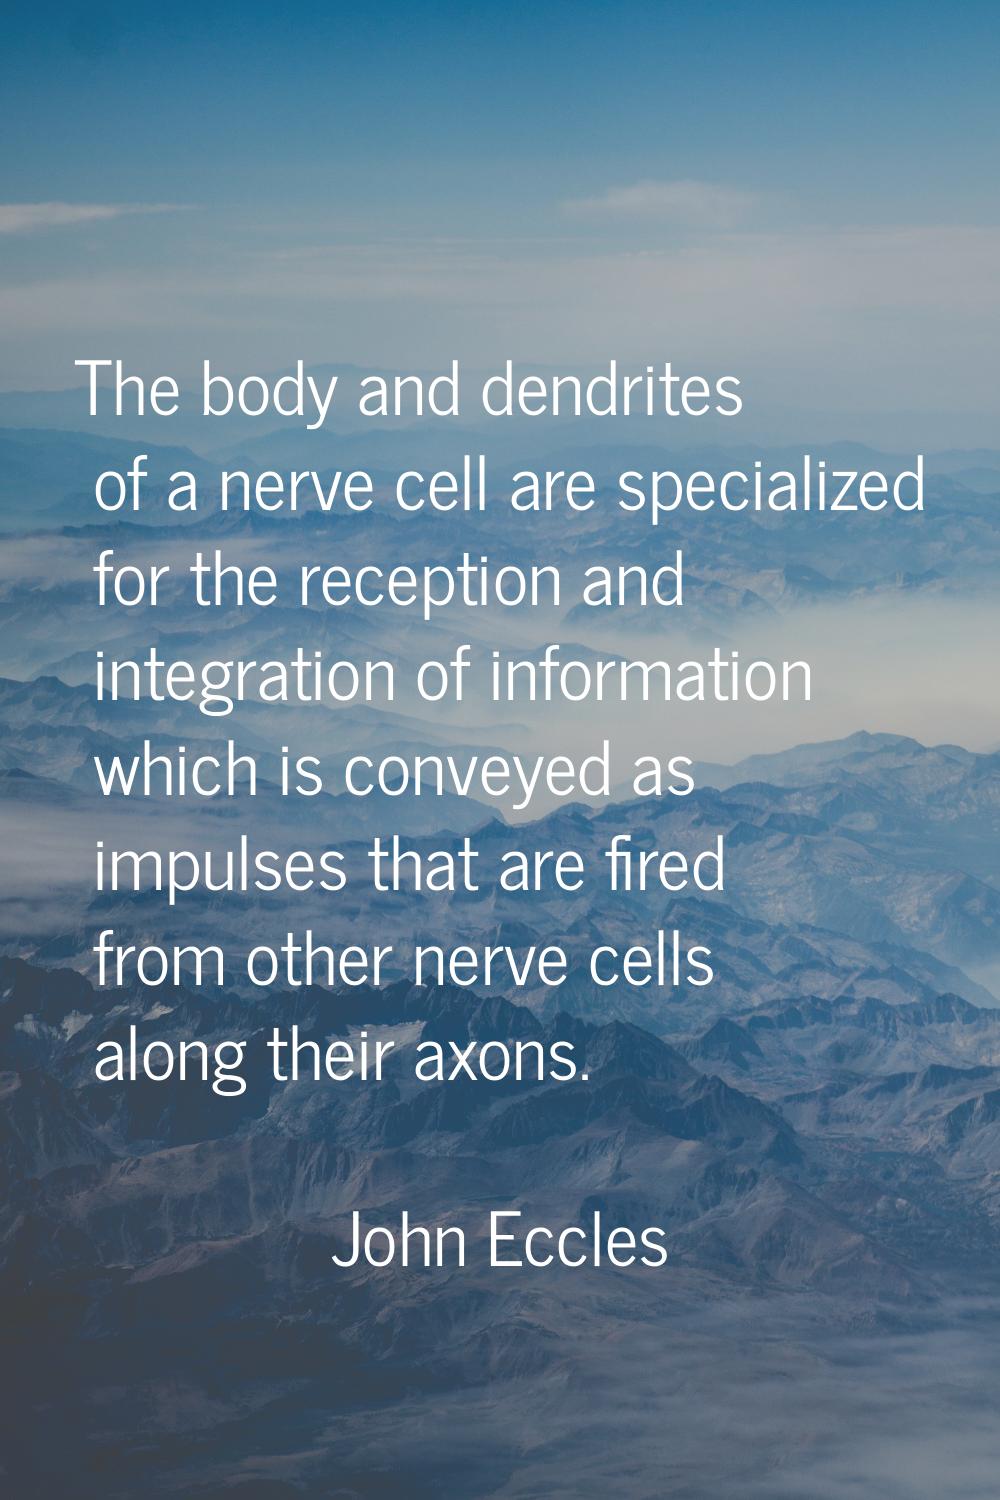 The body and dendrites of a nerve cell are specialized for the reception and integration of informa